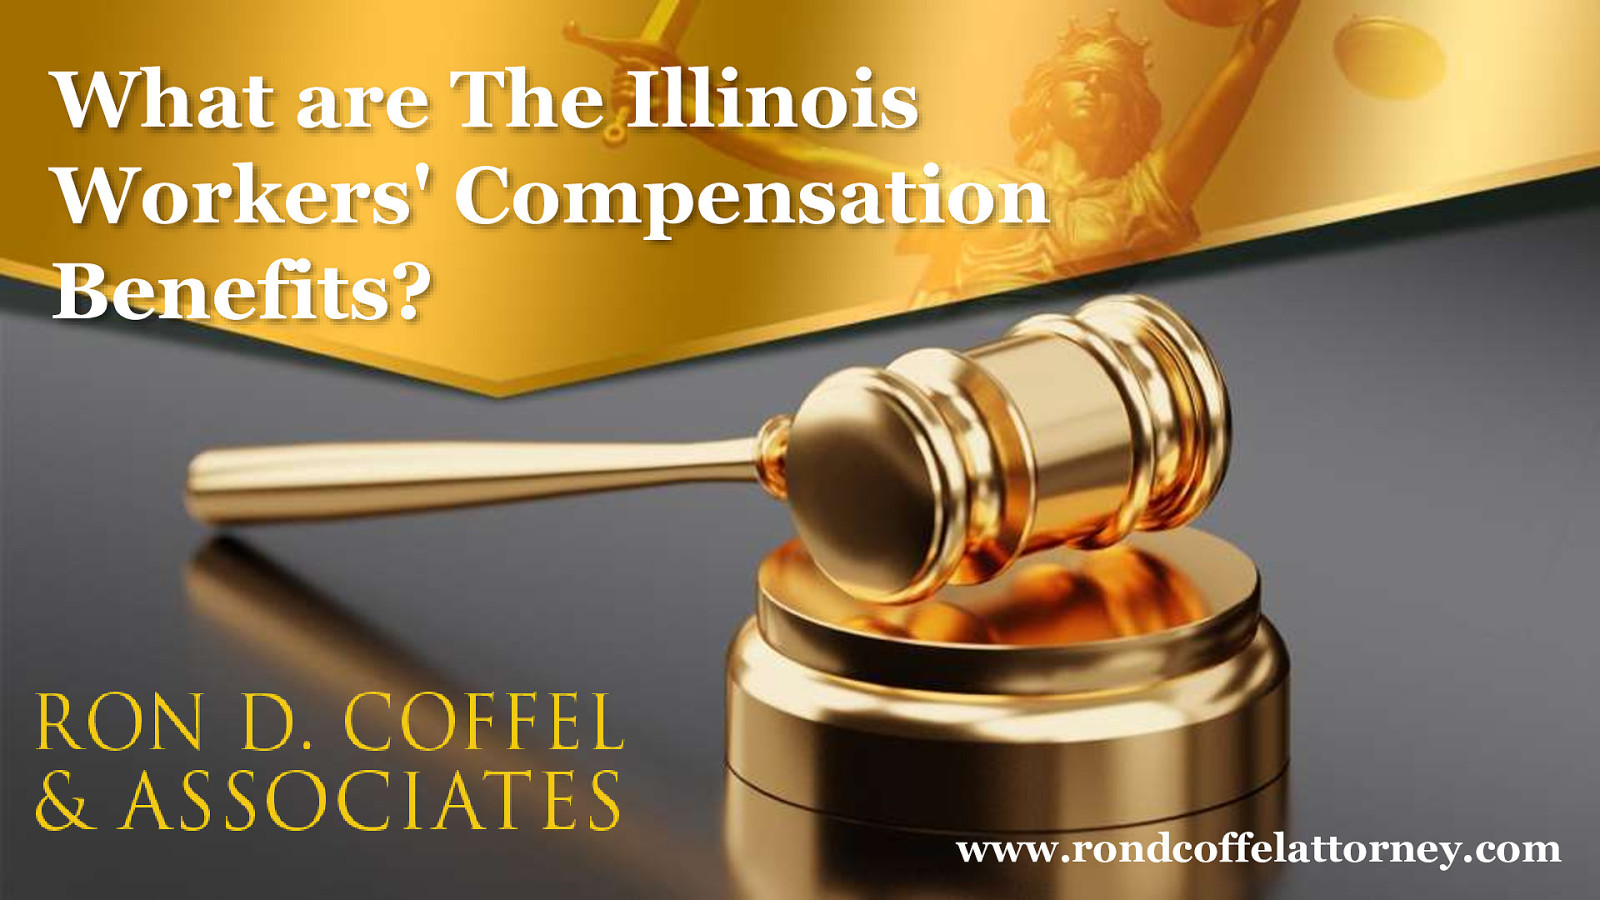 Illinois Workers’ Compensation Benefits